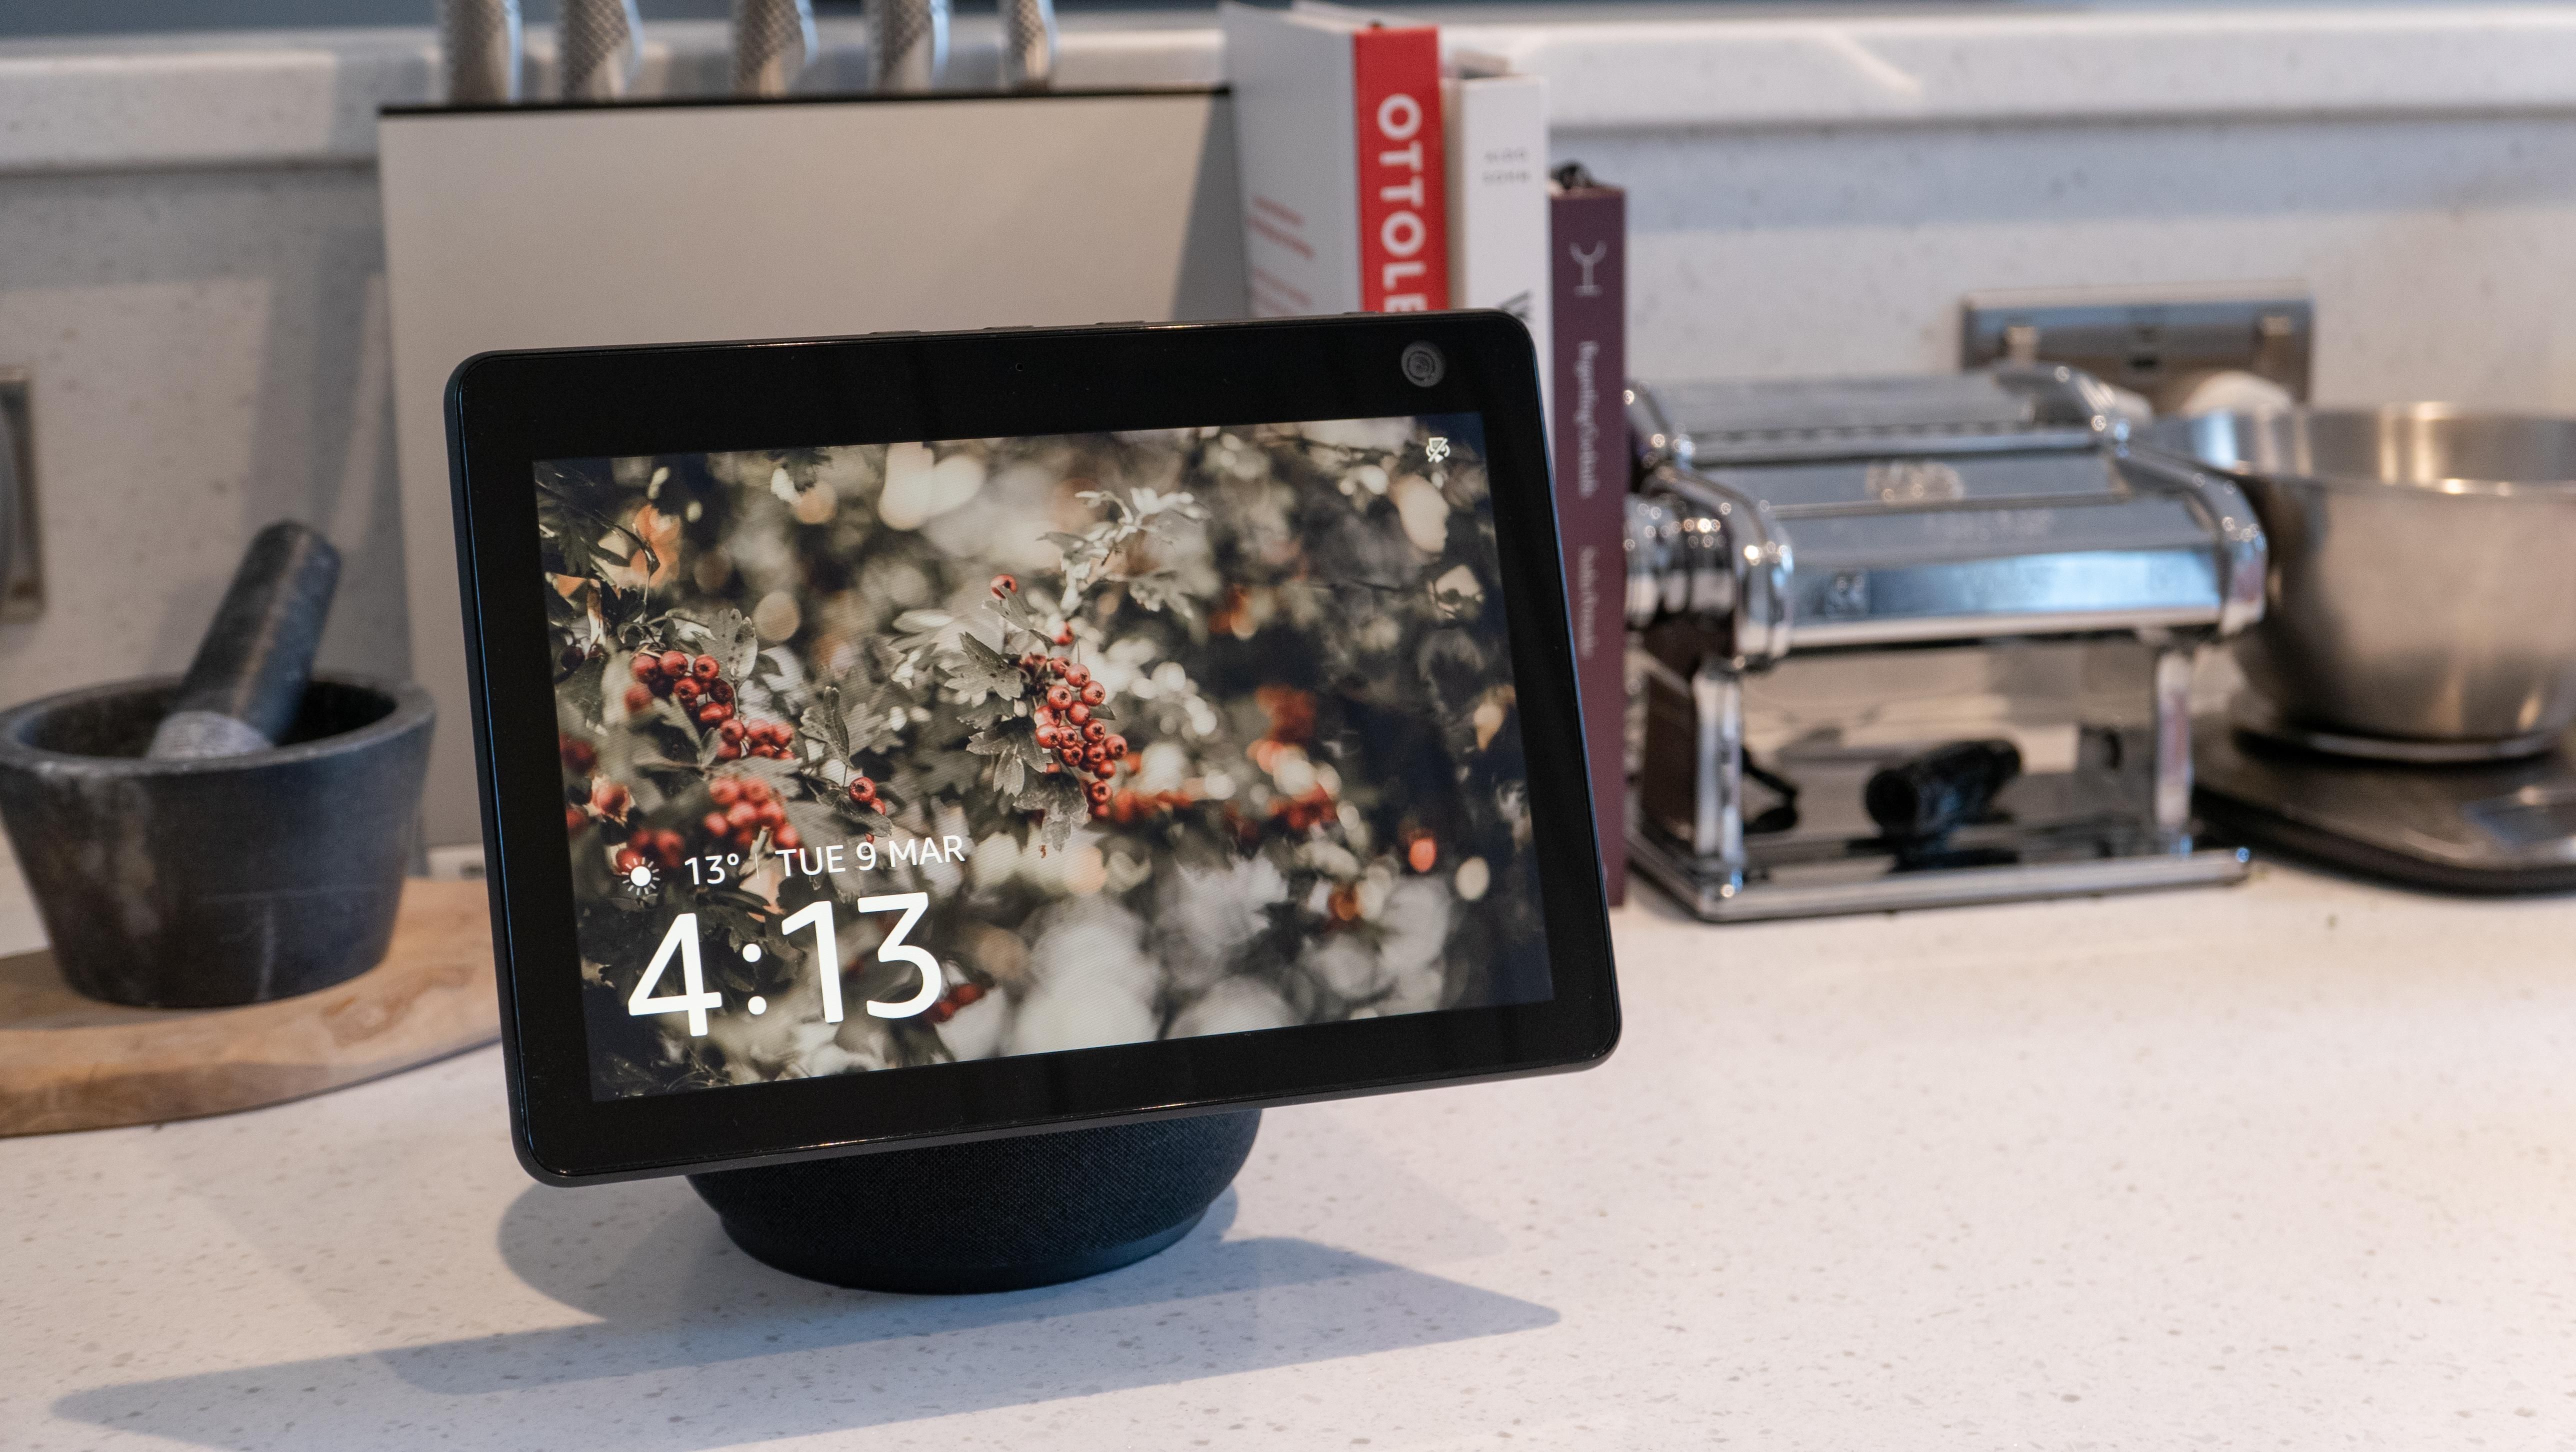 Echo Show 10 (3rd Gen) - Charcoal in the Smart Speakers & Displays  department at